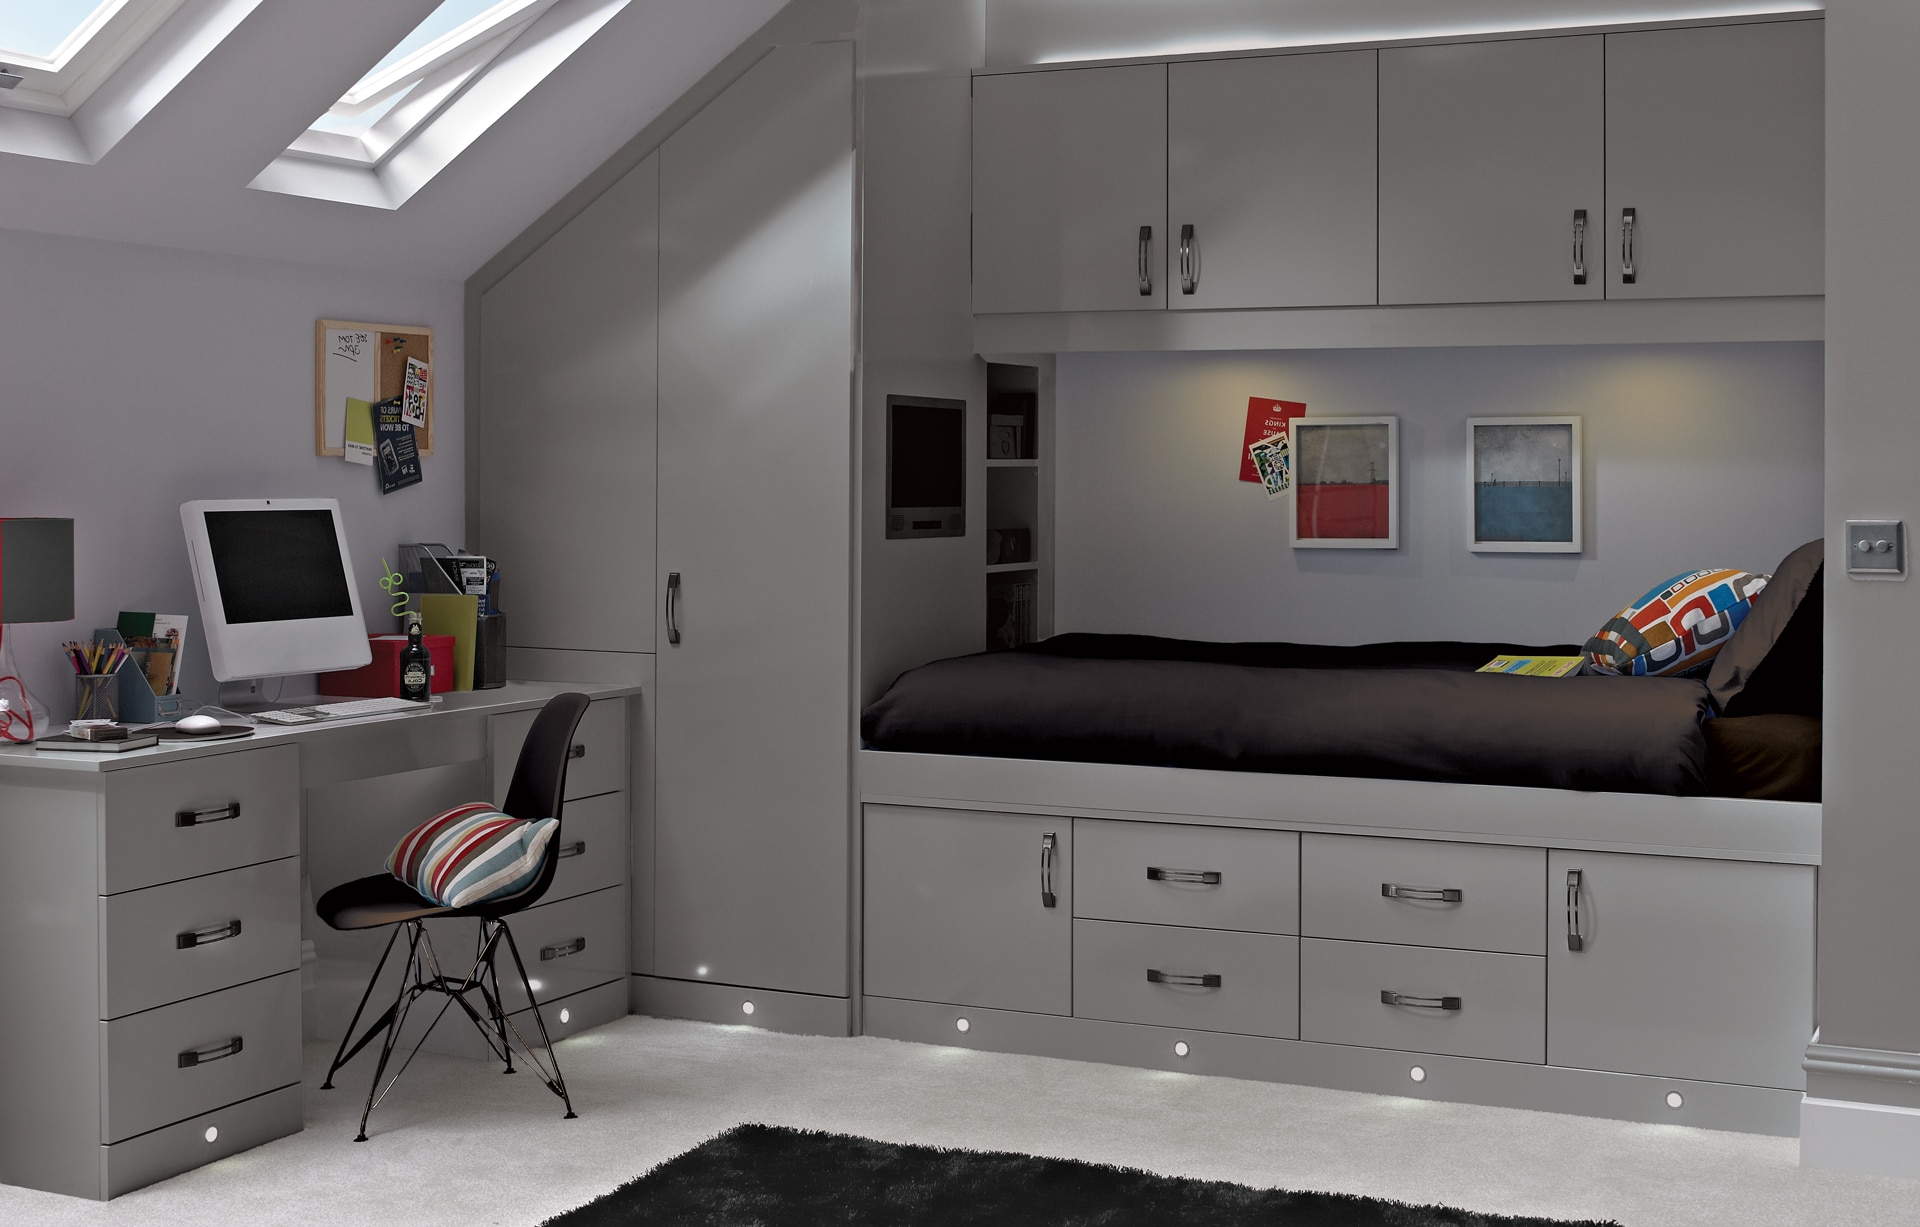 Space saver fitted wardrobe design in grey